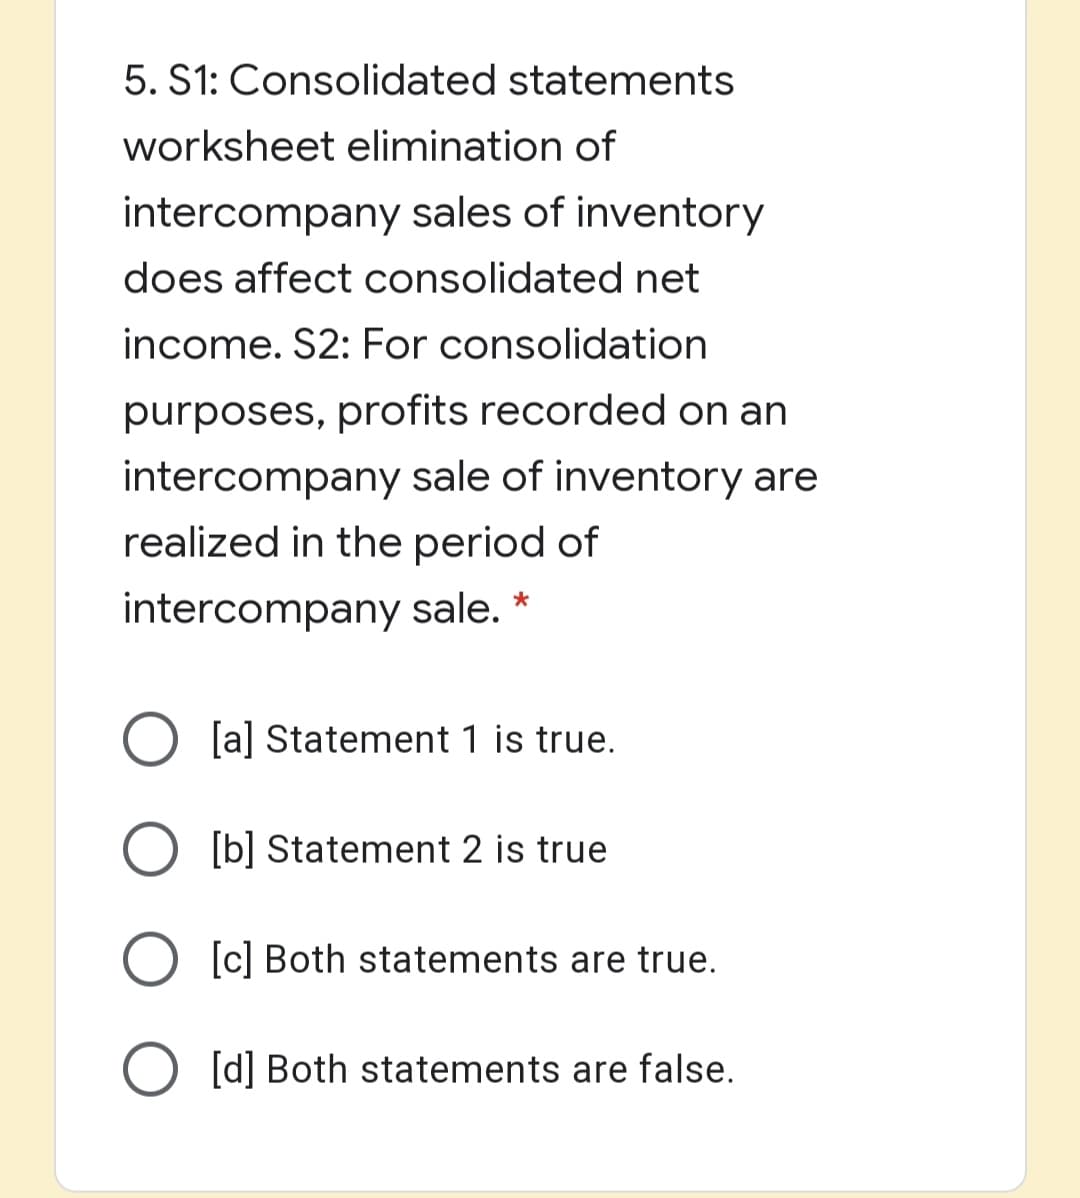 5. S1: Consolidated statements
worksheet elimination of
intercompany sales of inventory
does affect consolidated net
income. S2: For consolidation
purposes, profits recorded on an
intercompany sale of inventory are
realized in the period of
intercompany sale. *
[a] Statement 1 is true.
O [b] Statement 2 is true
[c] Both statements are true.
O [d] Both statements are false.
